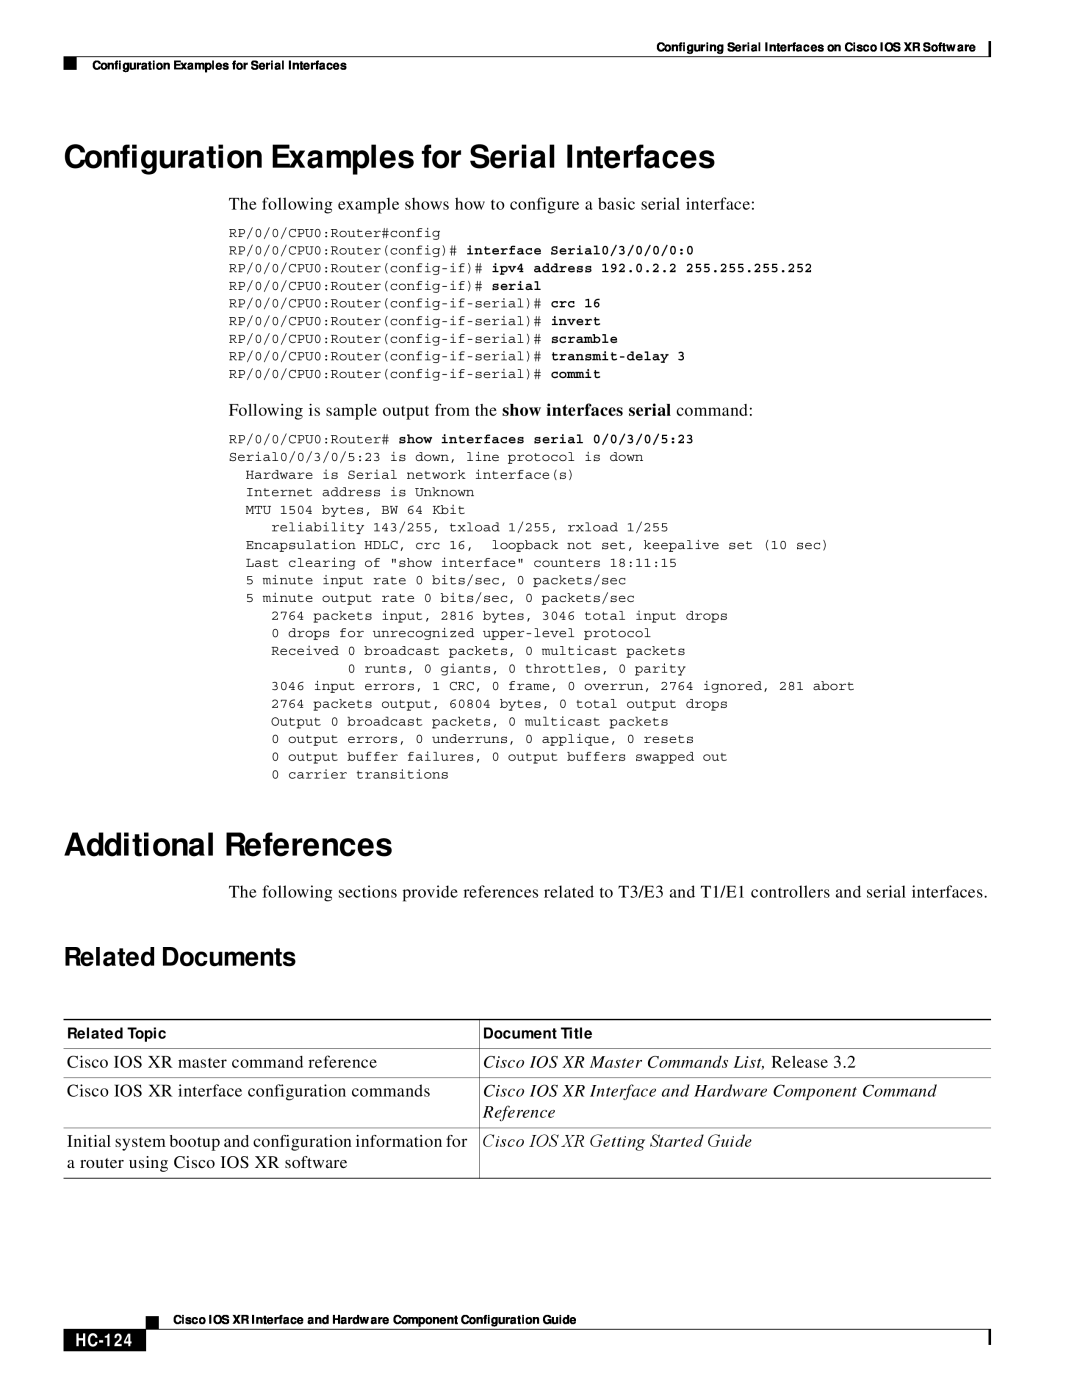 Cisco Systems XR 12000 SIP-601 Configuration Examples for Serial Interfaces, Additional References, Related Documents 